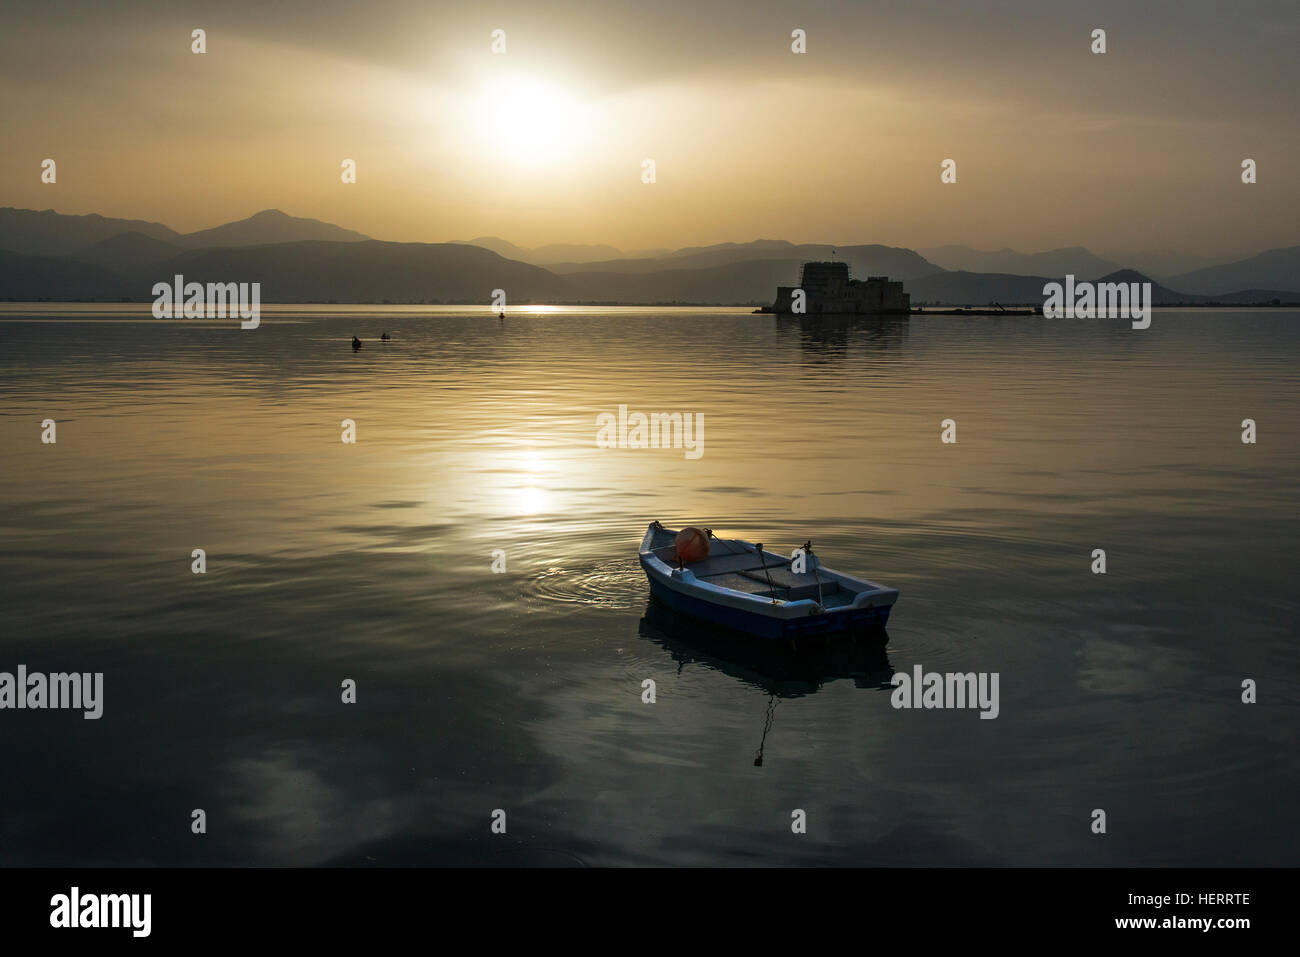 Approaching sunset over Argolic Gulf, Nafplion, Greece with rowboat and island on the sea. Stock Photo